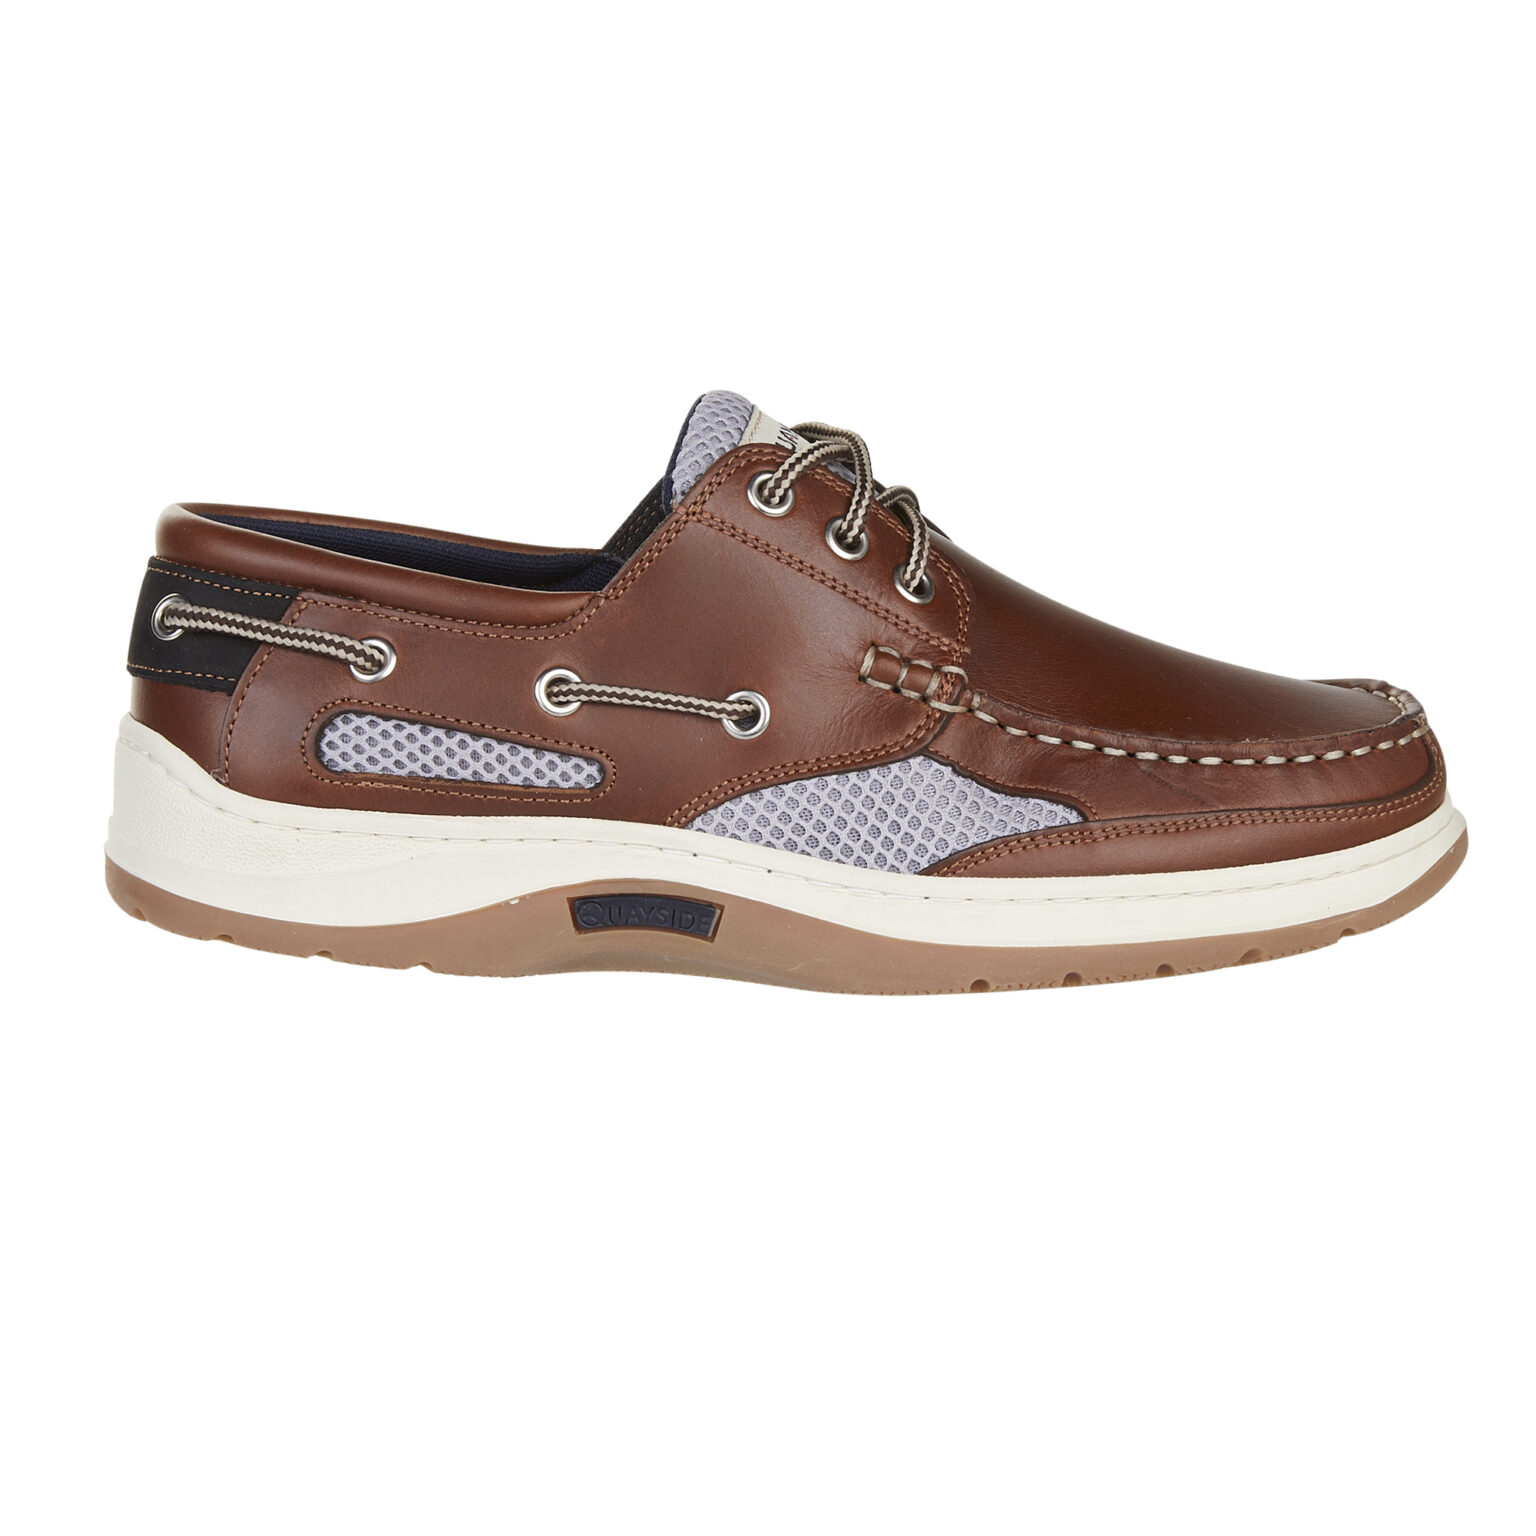 Quayside Sydney Boat Shoes – Quayside Deck Shoes